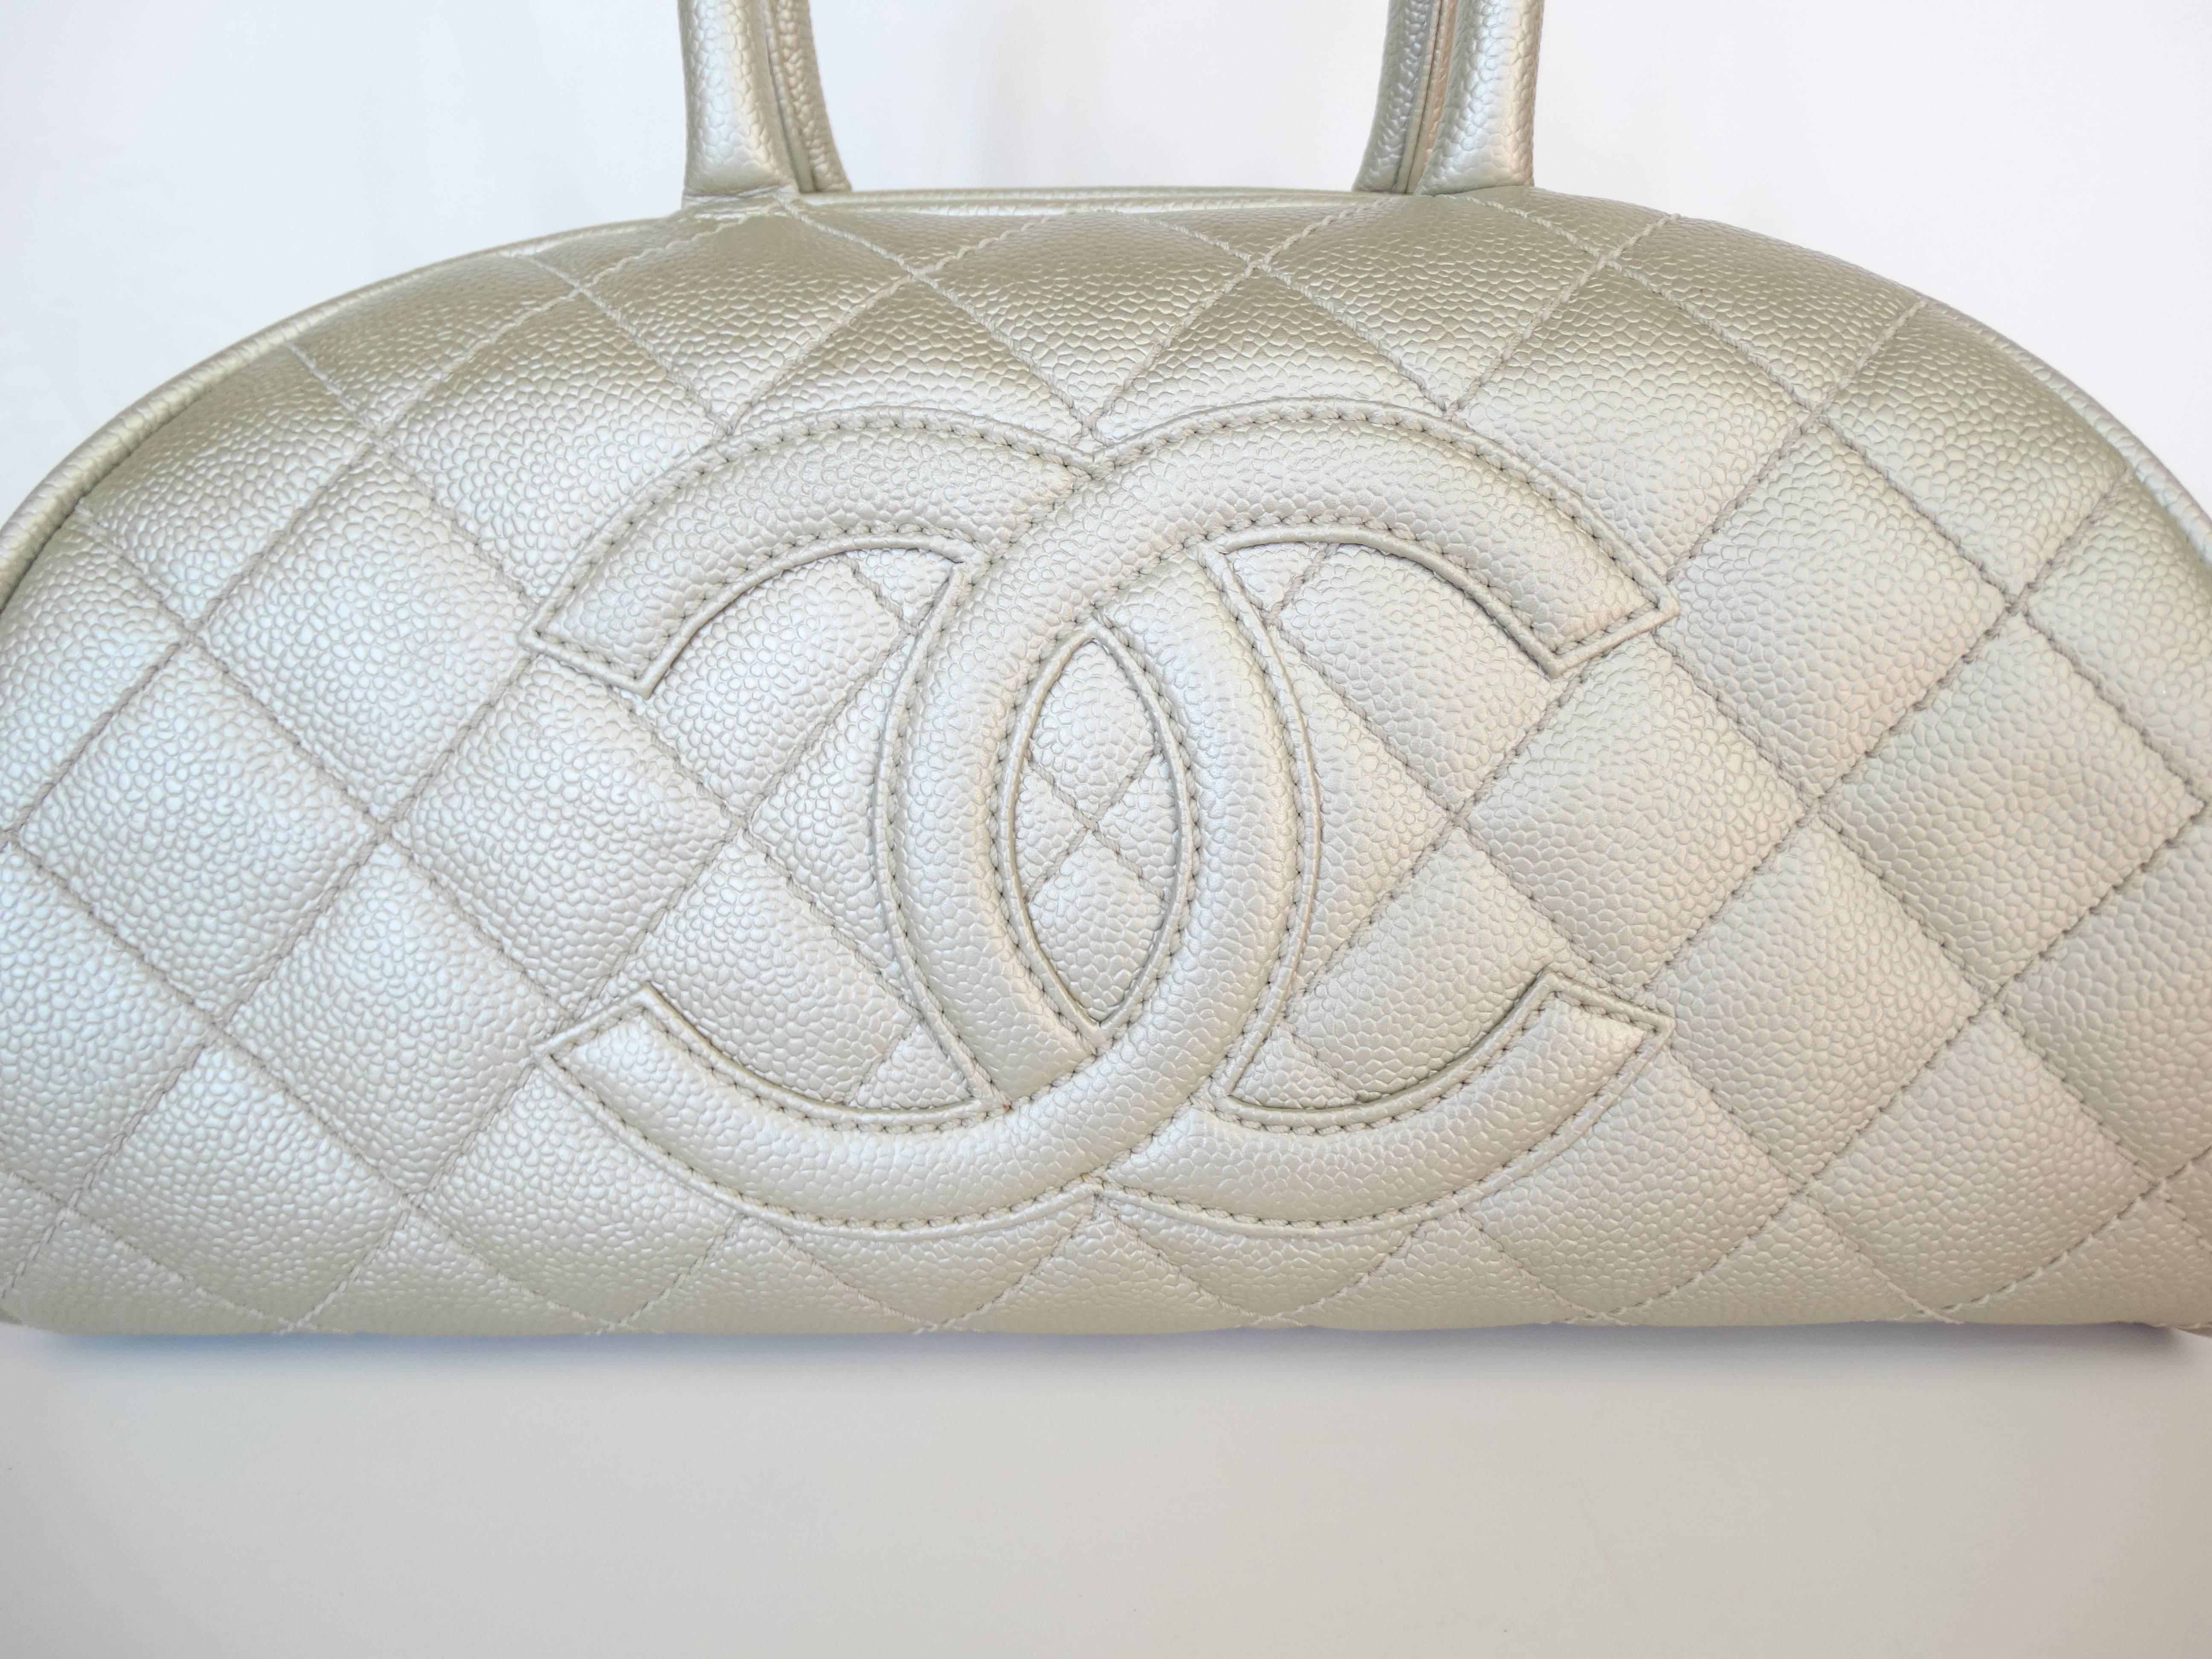 The most adorable Chanel bowler bag! Made of a silver toned metallic caviar leather with signature Chanel quilting and CC logo on the front. Quilting continues onto the back of the bag. Lampo zipper zips open from the top to reveal fully lined